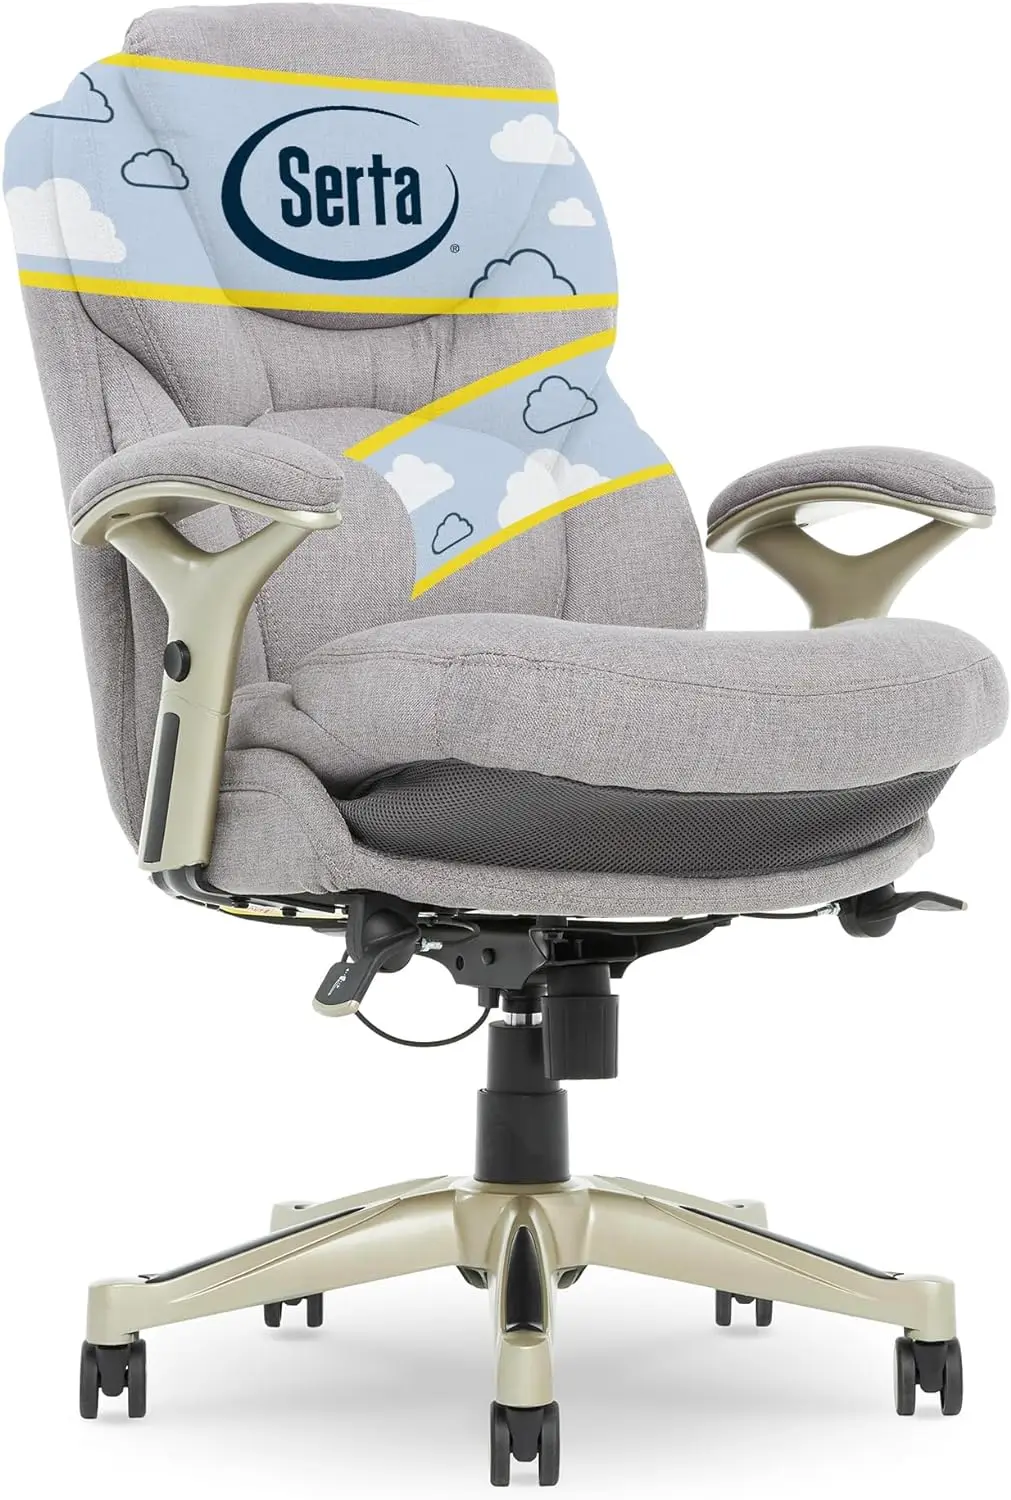 

Executive office chair Sports technology adjustable mid-back design with lumbar support, light gray fabric